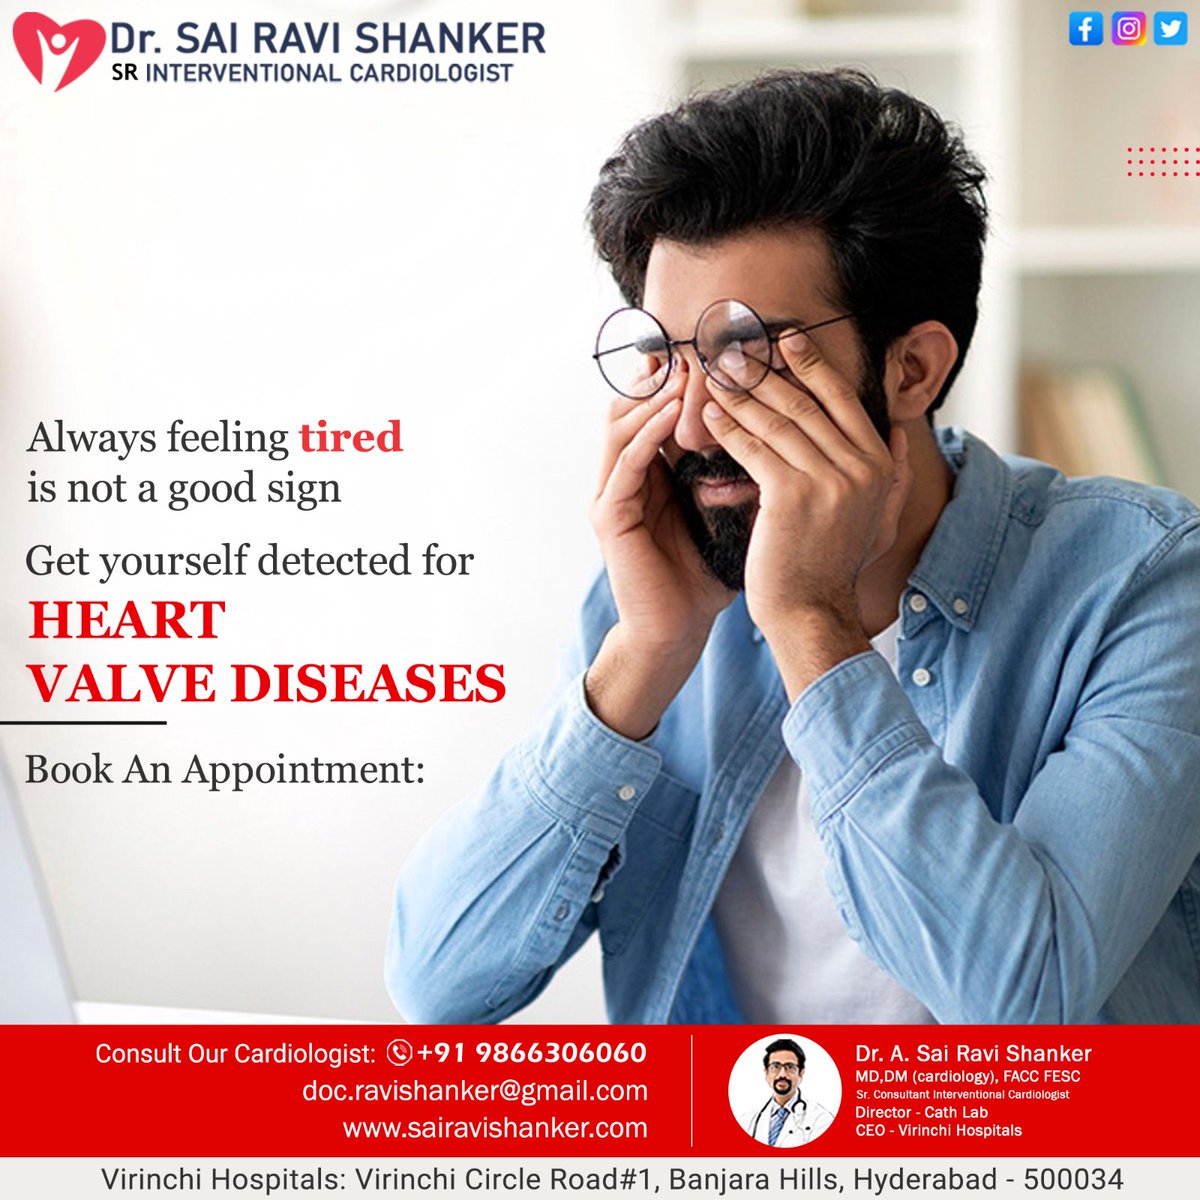 Feeling chronically #tired? It could signal #heartvalvedisease. Don't ignore #symptoms. Early detection saves lives. Prioritize your heart health today.

#Drsairavishankar #cardiologist #consultantcardiologist #cardiologydoctor #InterventionalCardiologst #virinchihospital